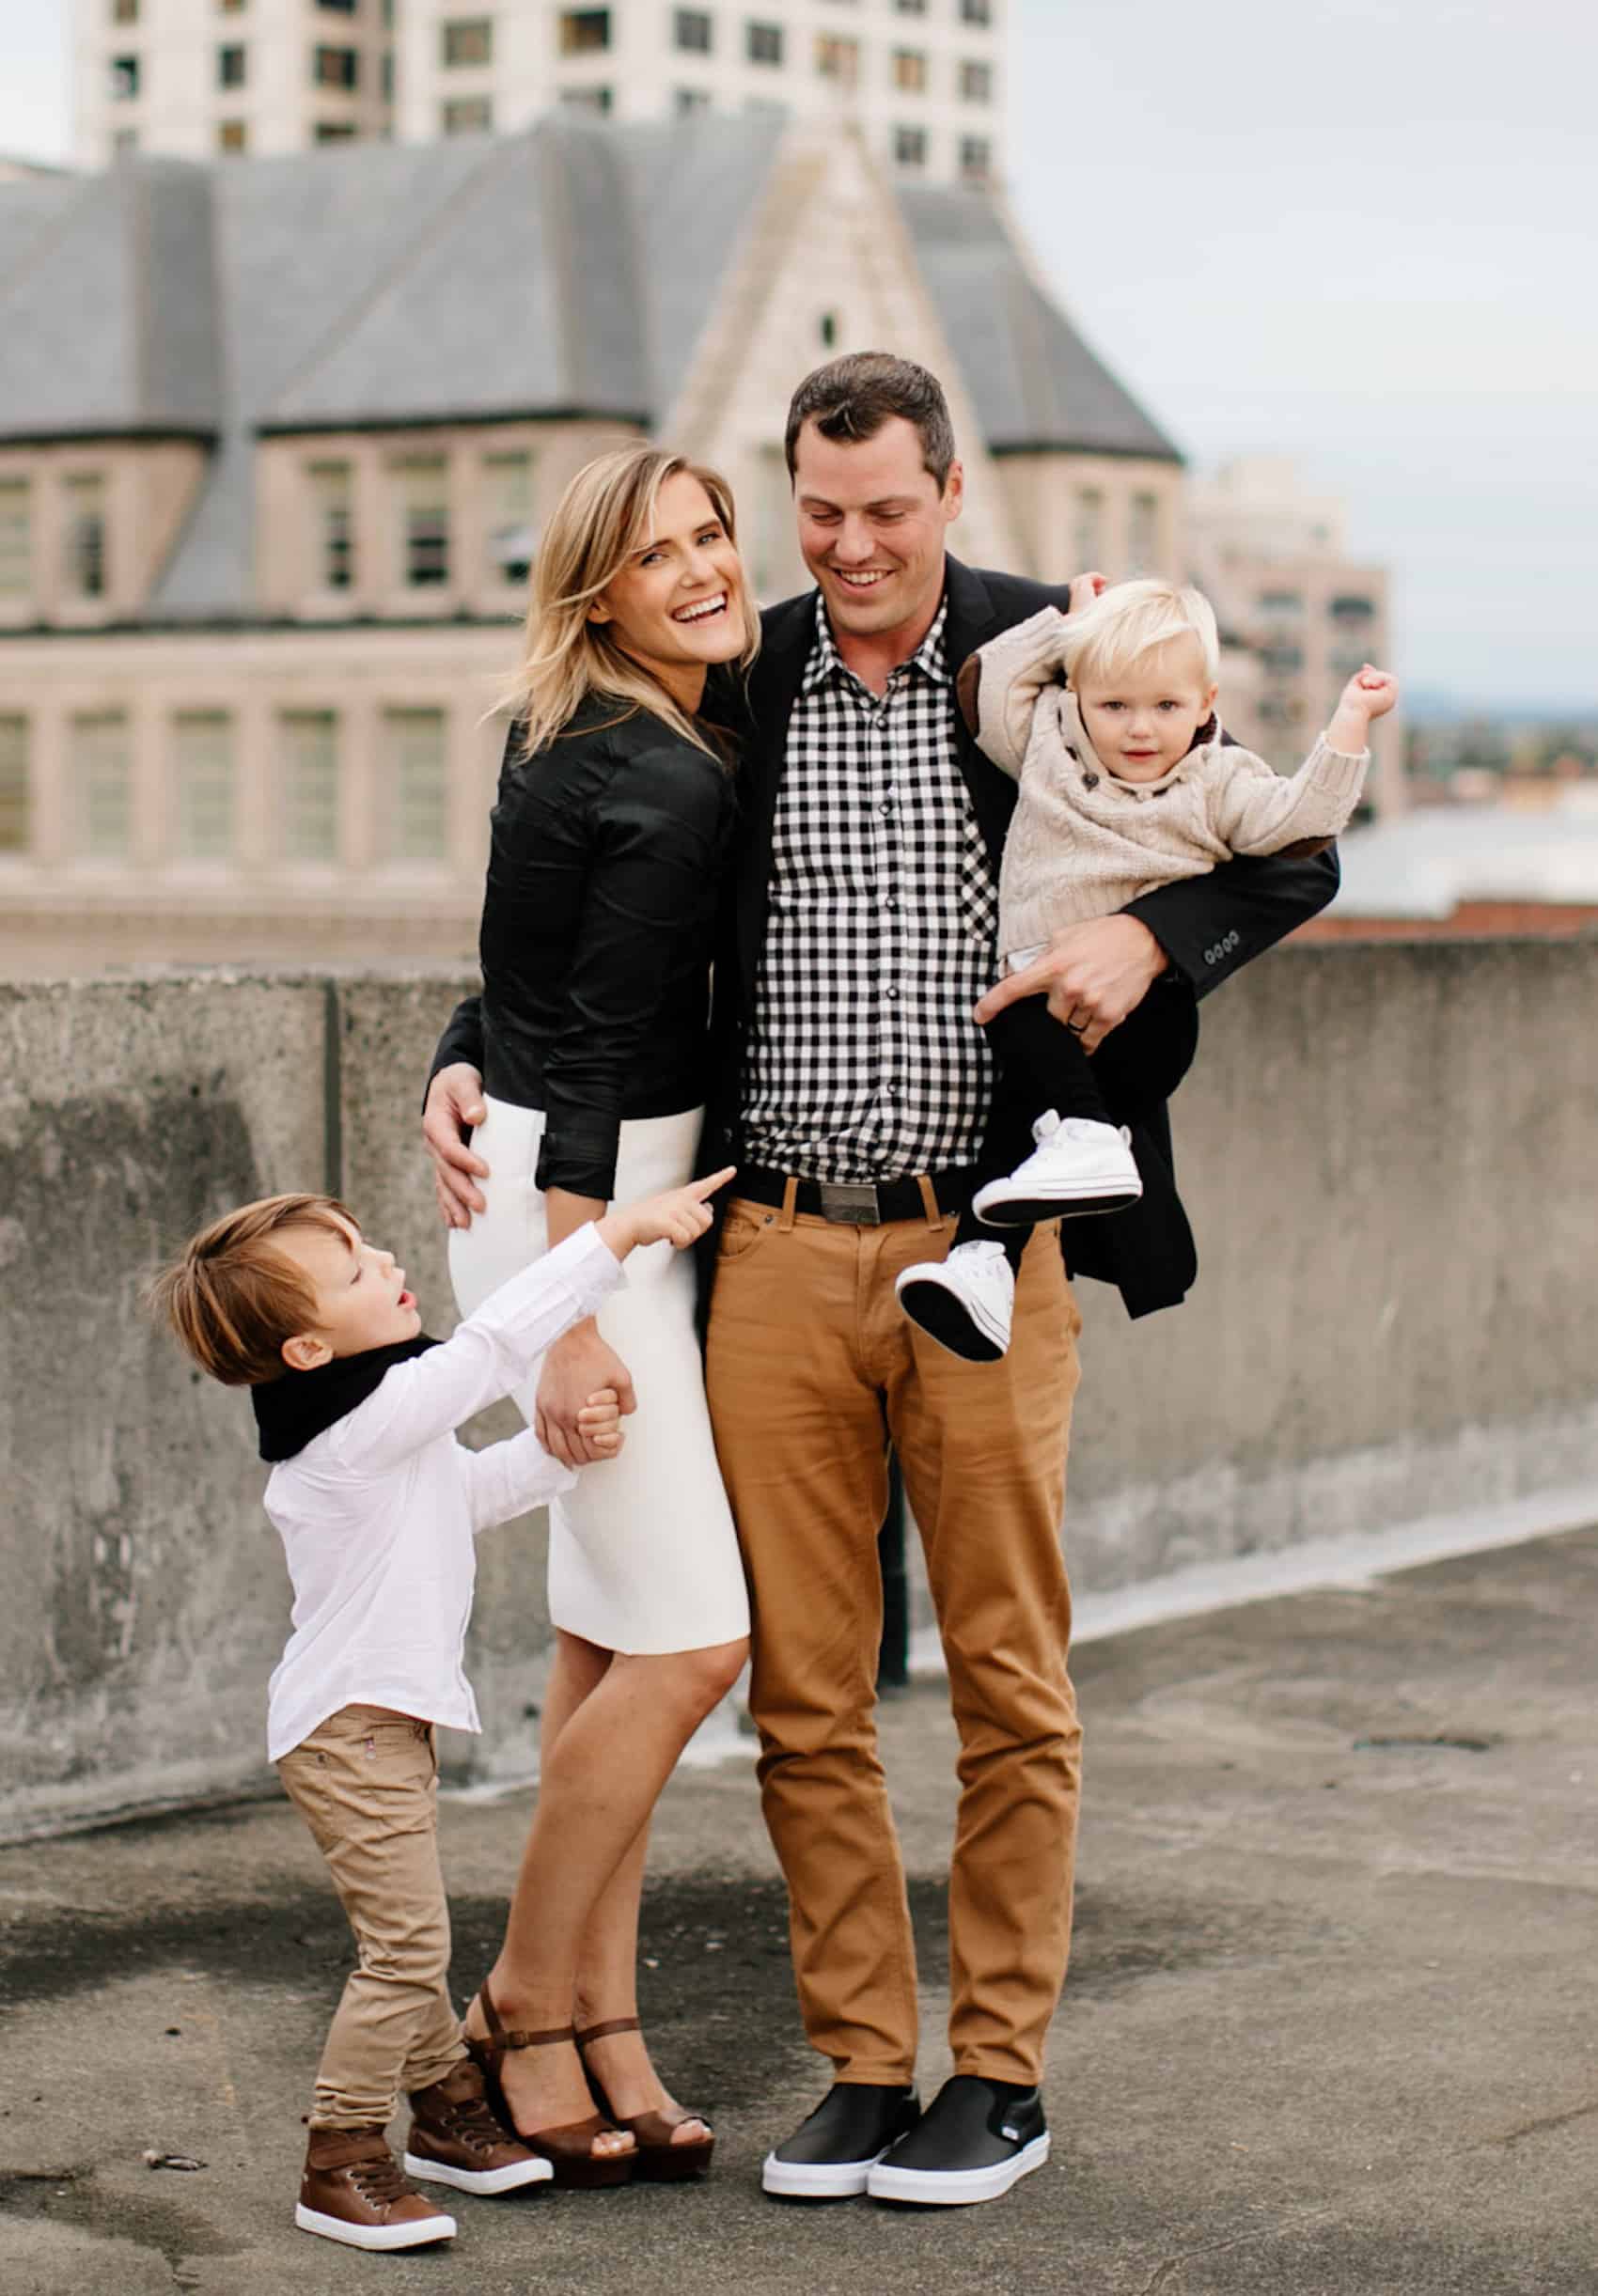 family photoshoot. 1 70+ Best Family Photoshoot Outfit Ideas That You Must Check - 6